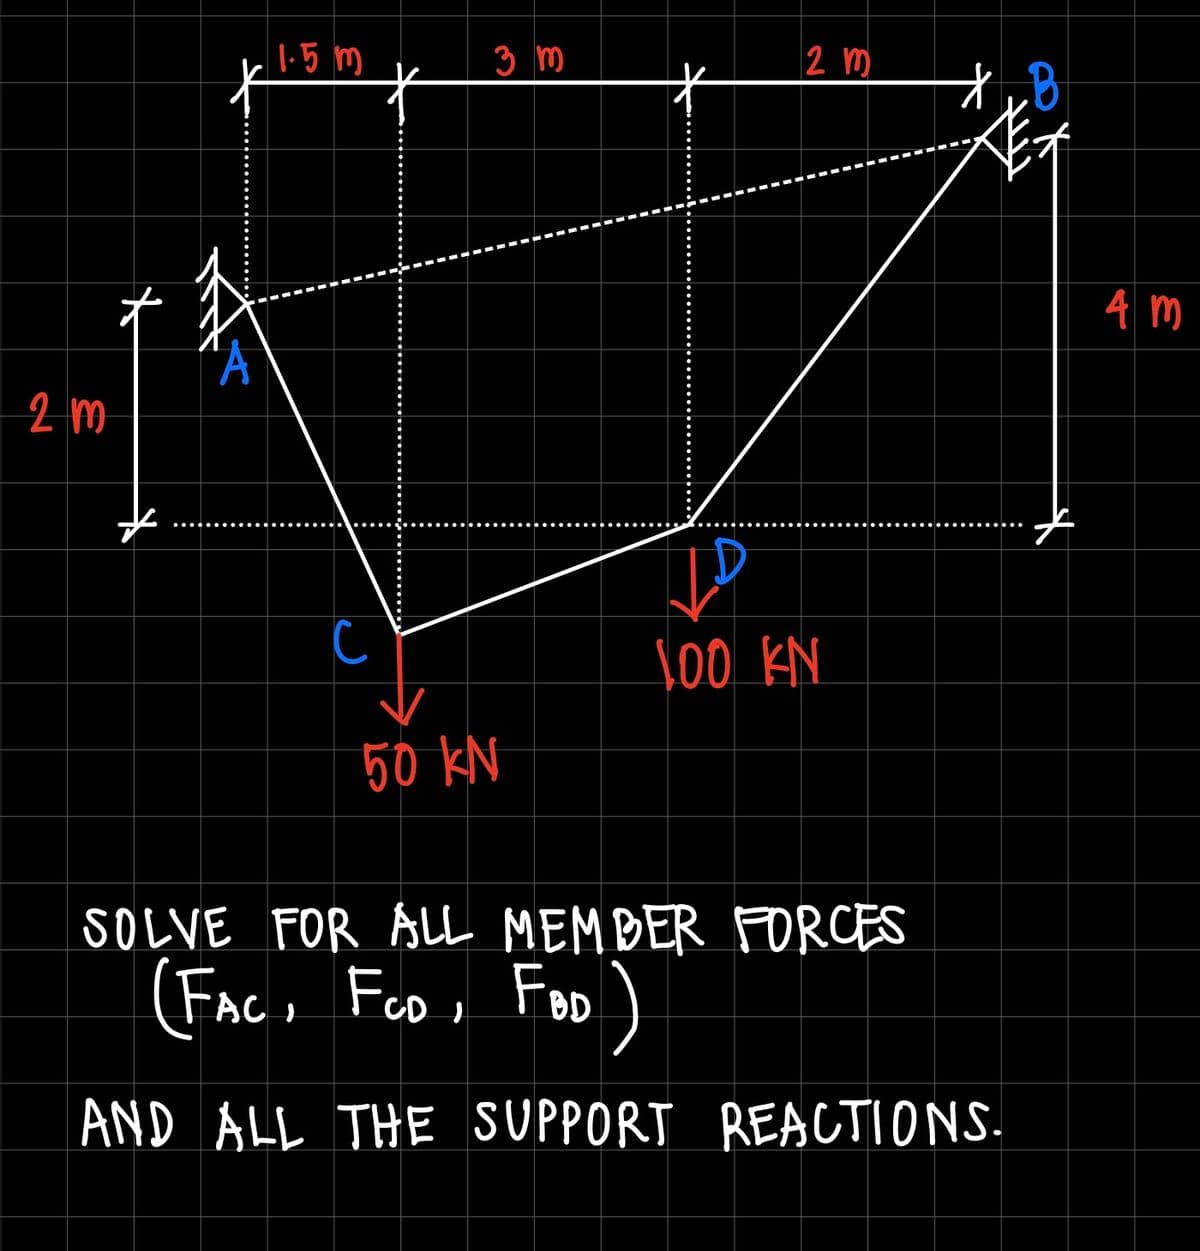 |-5 m
3 Im
2 m
4 m
2 m
00 KN
50 kN
SOLVE FOR ALL MEMBER FORCES
(FAc, Fco, FoD
AND ALL THE SUPPORT REACTIONS.
